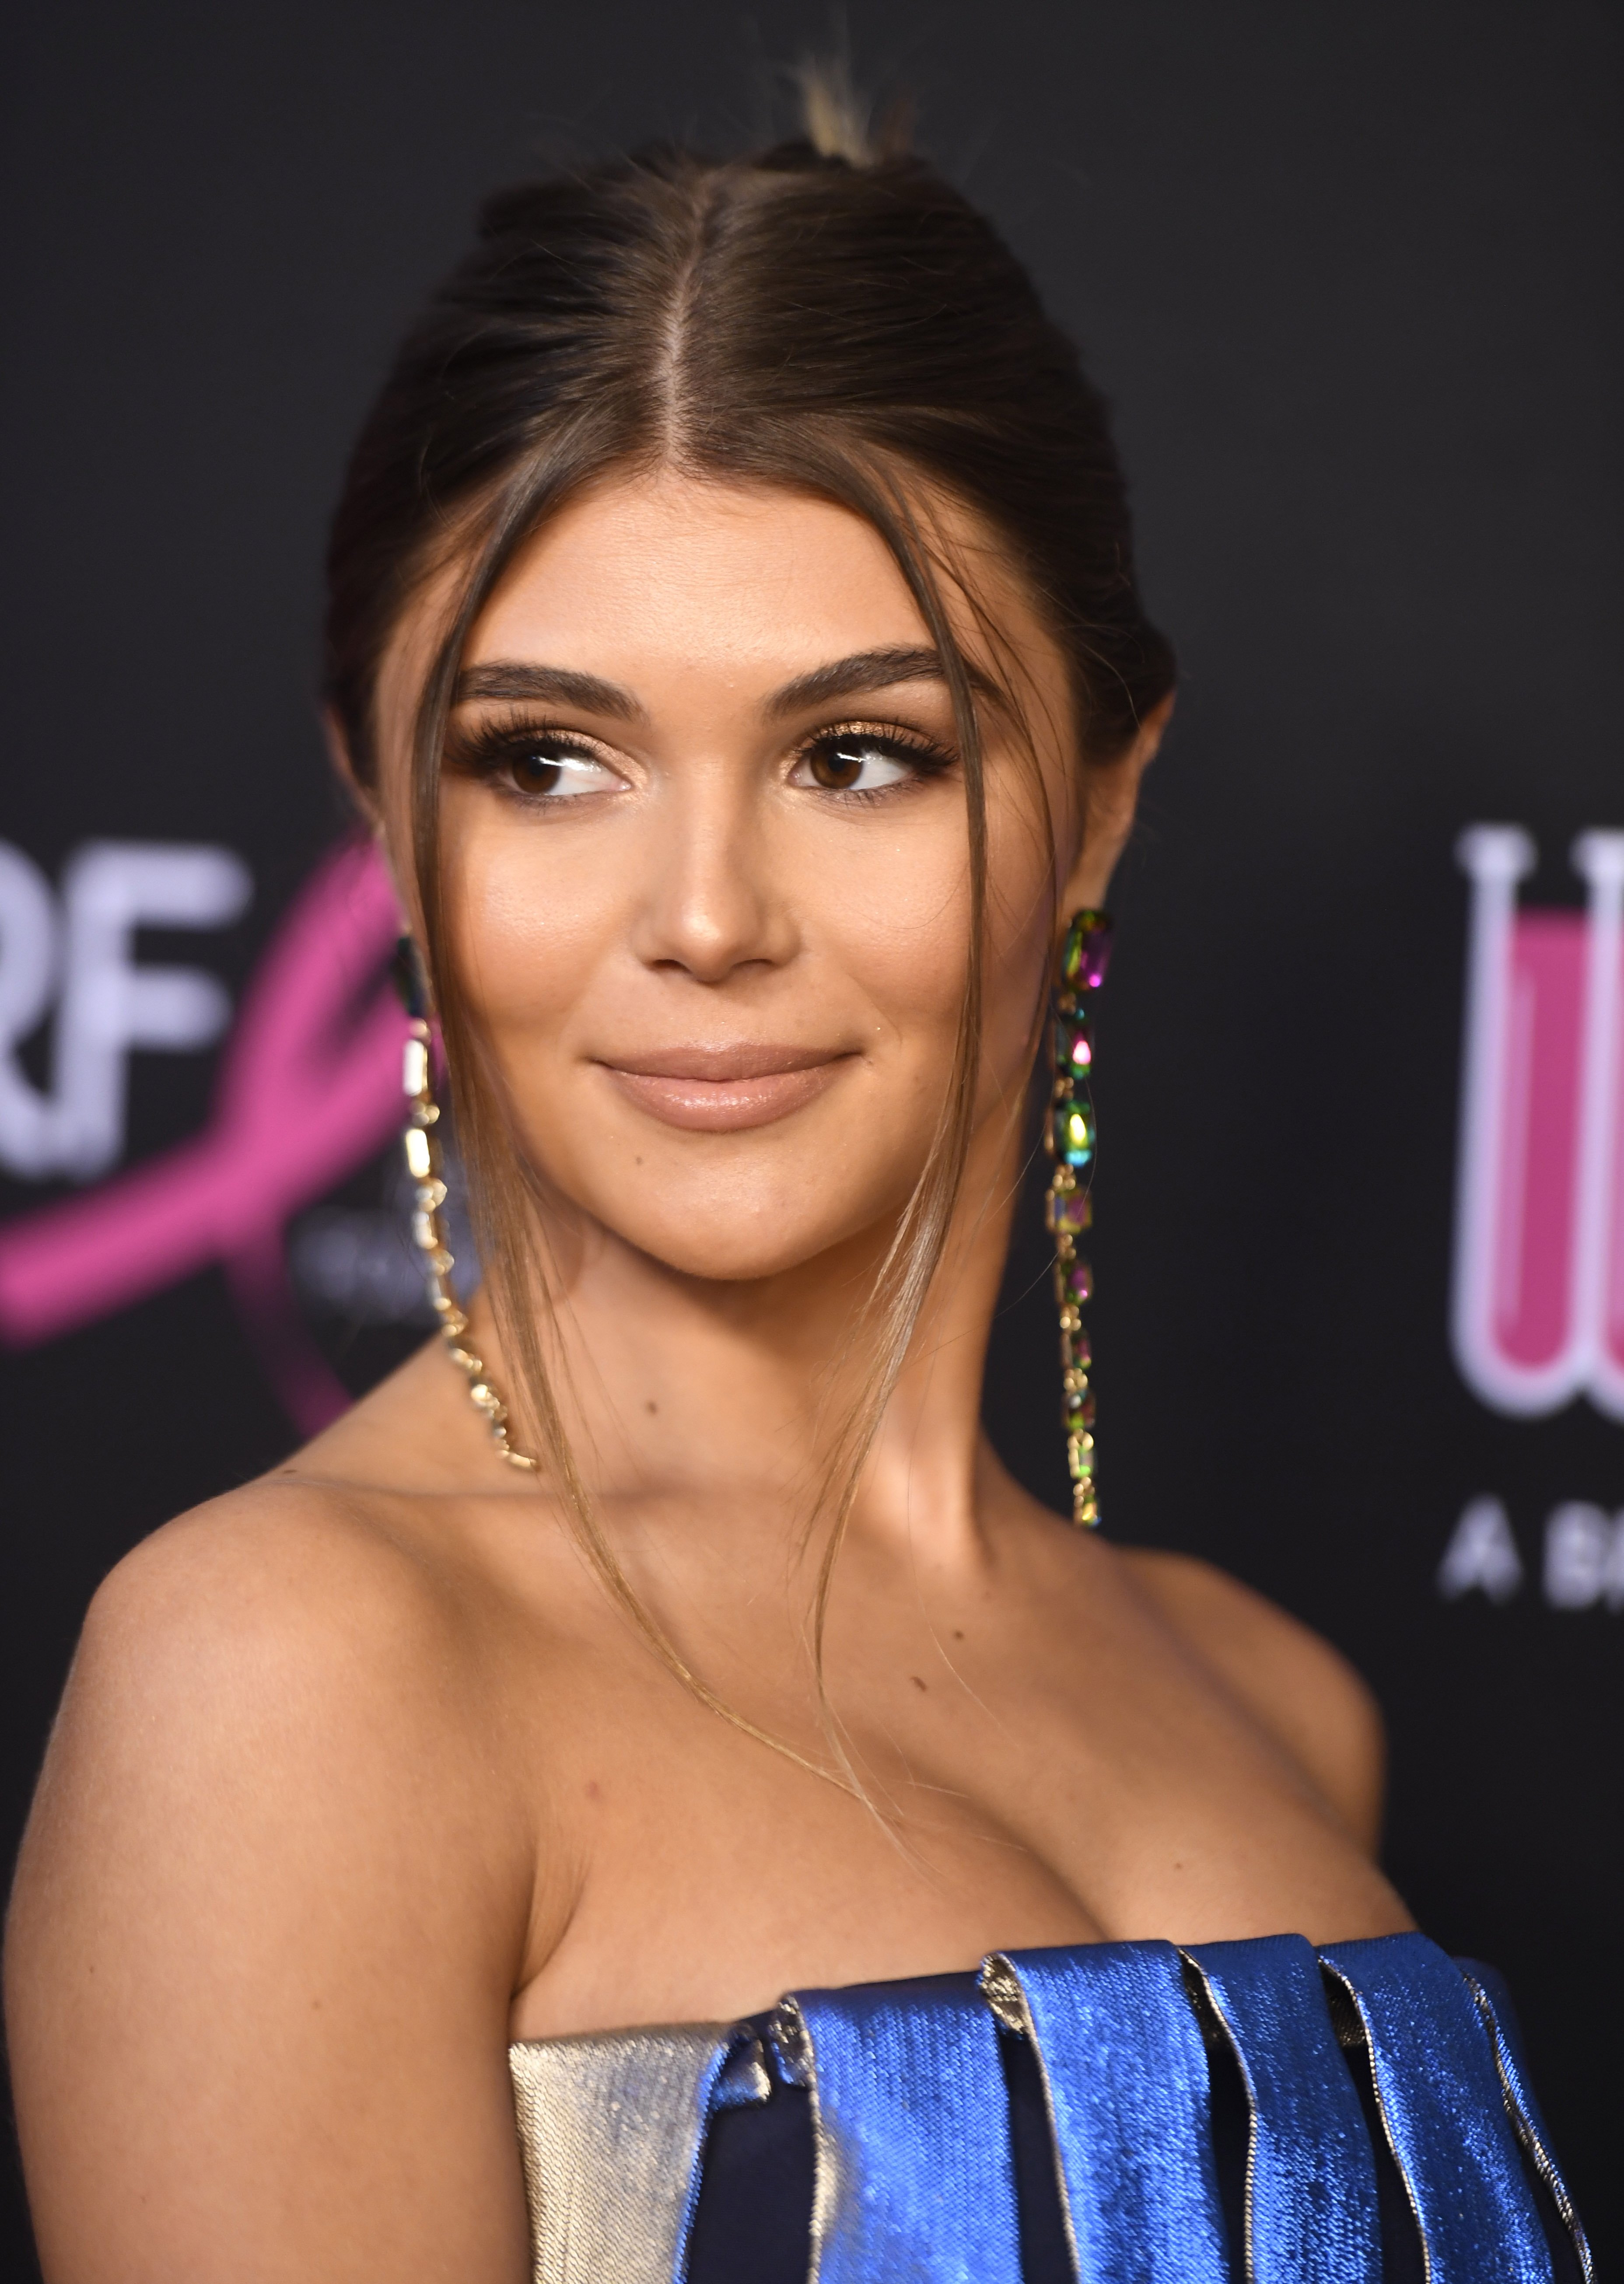 Olivia Jade Giannulli at the Women's Cancer Research Fund benefit gala in Beverly Hills, February, 2019. | Photo: Getty Images.